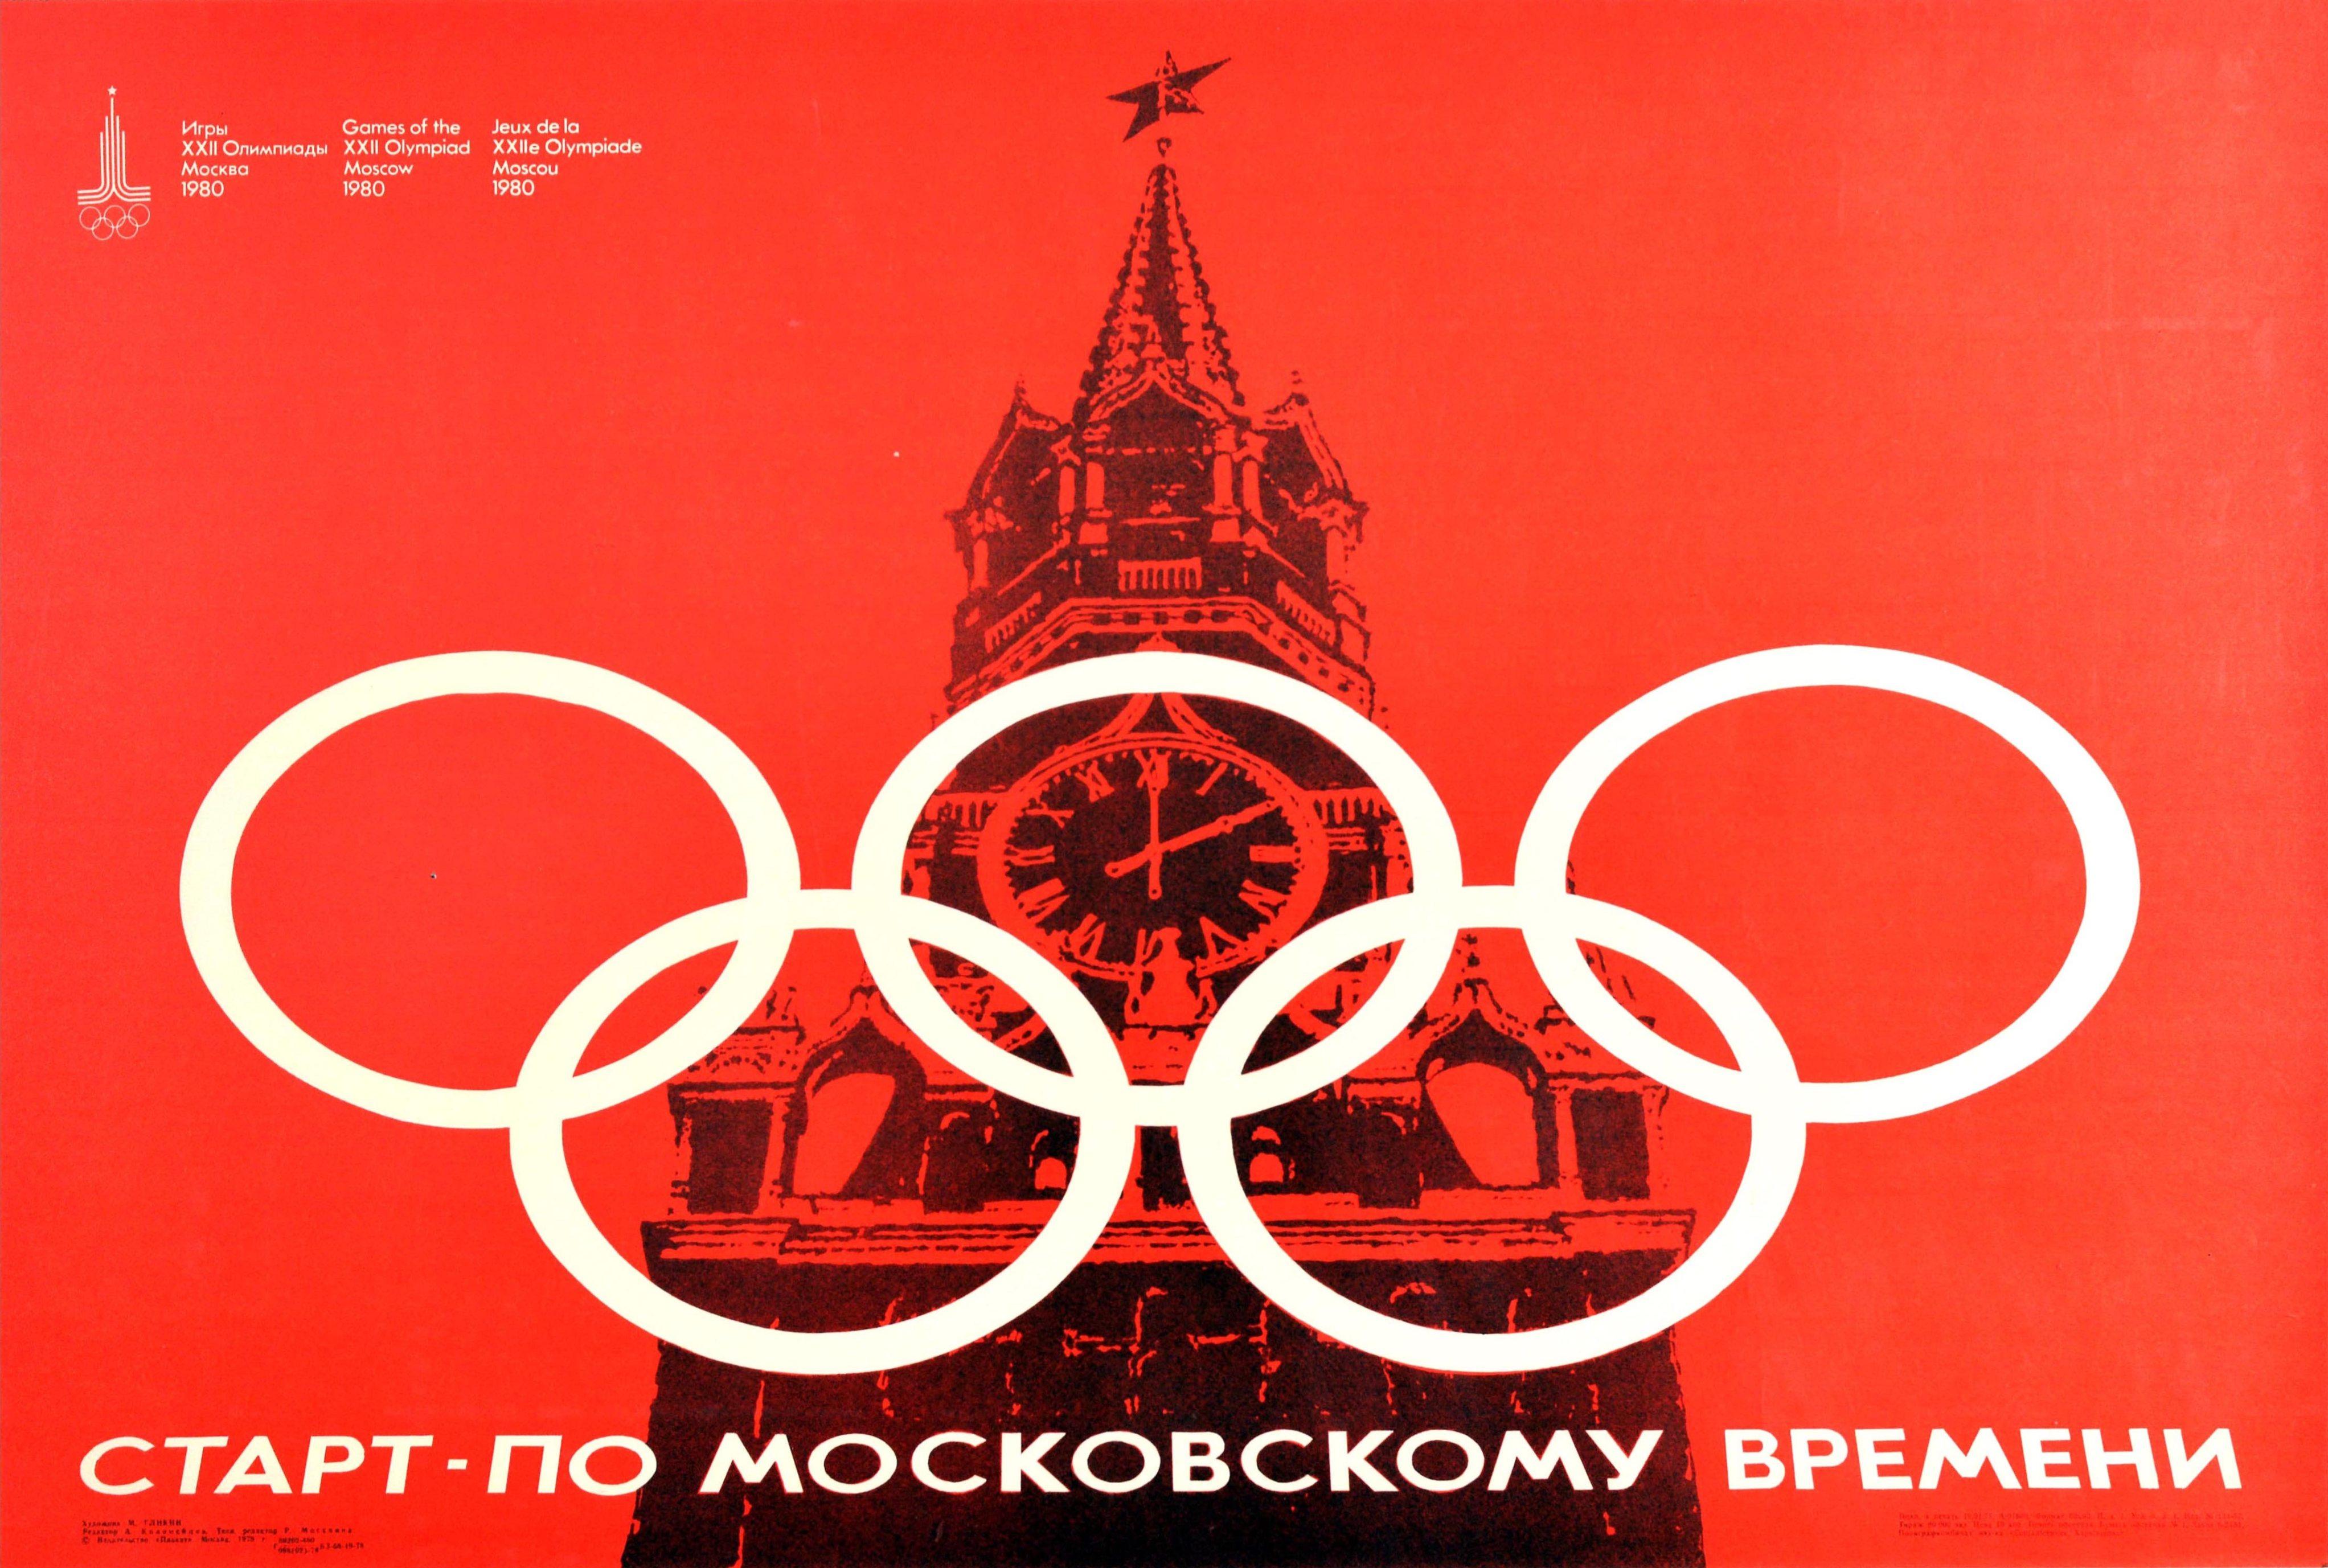 Original vintage Soviet sports poster for the 22nd Summer Olympic Games / Games of the XXII Olympiad in 1980 held in Moscow Russia, featuring an illustration of Moscow's Kremlin Spasskaya Tower with the Kremlin Chimes Clock in the centre - five